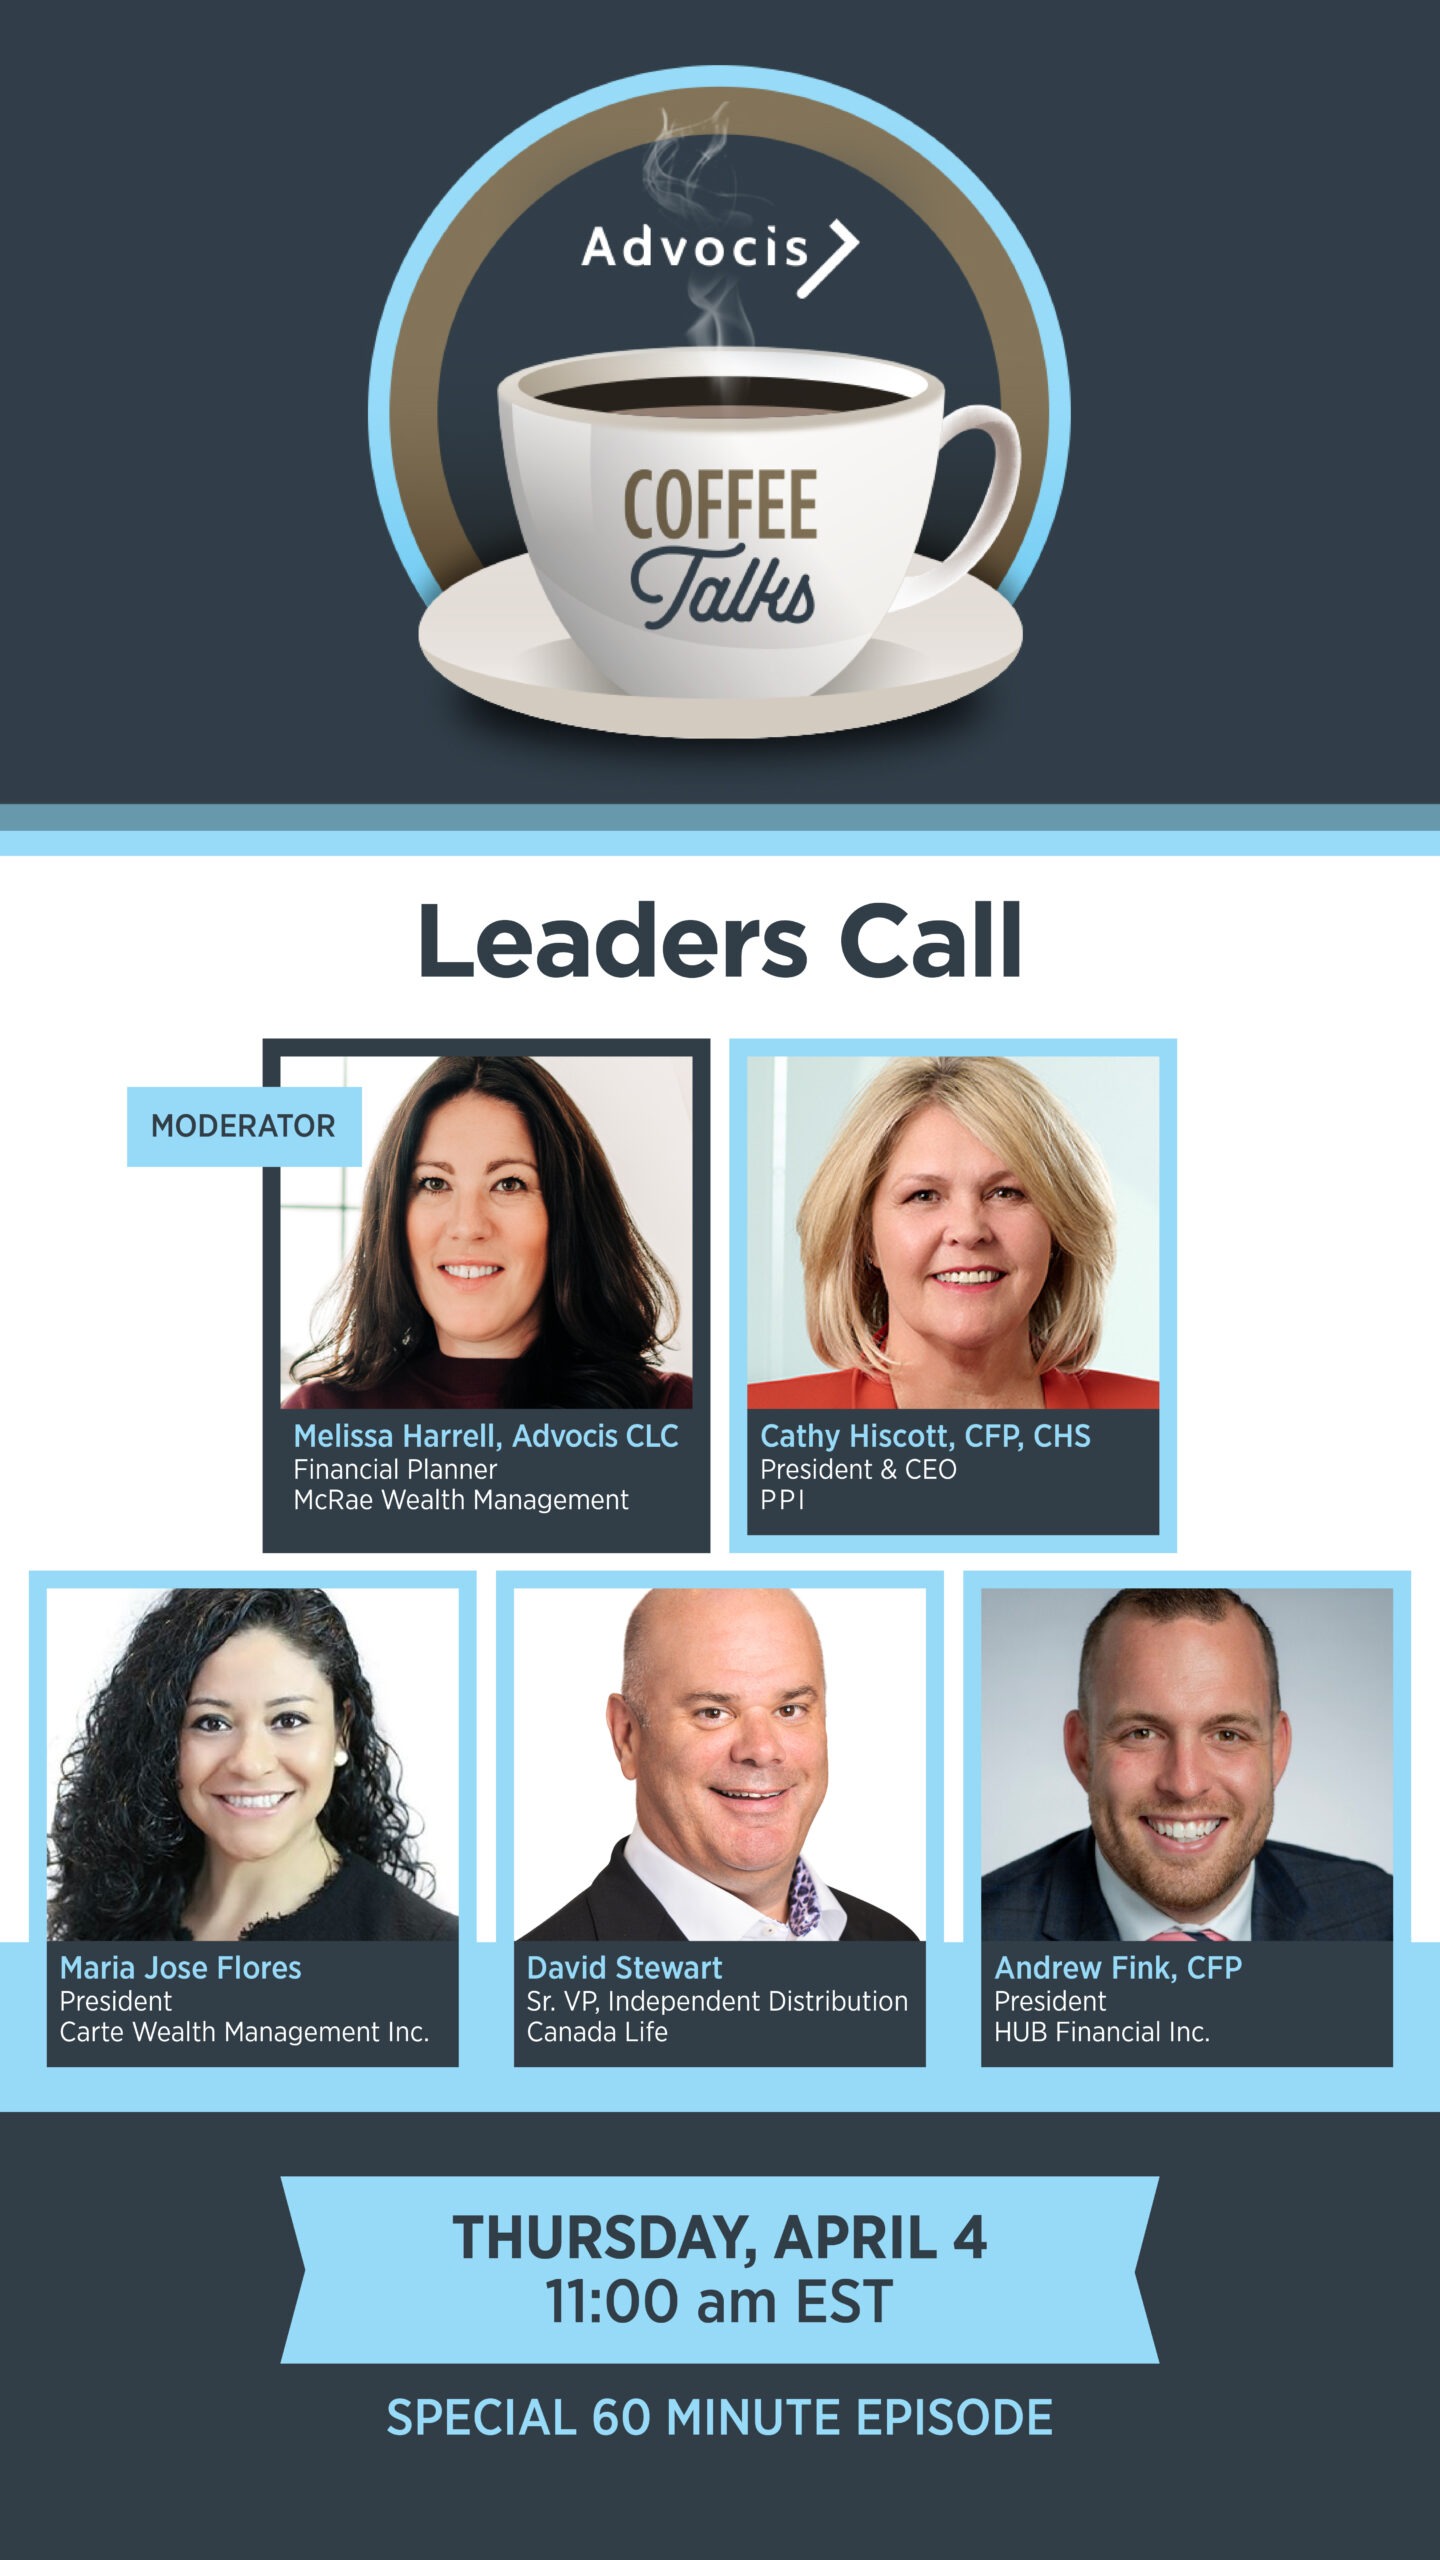 The Leaders Call